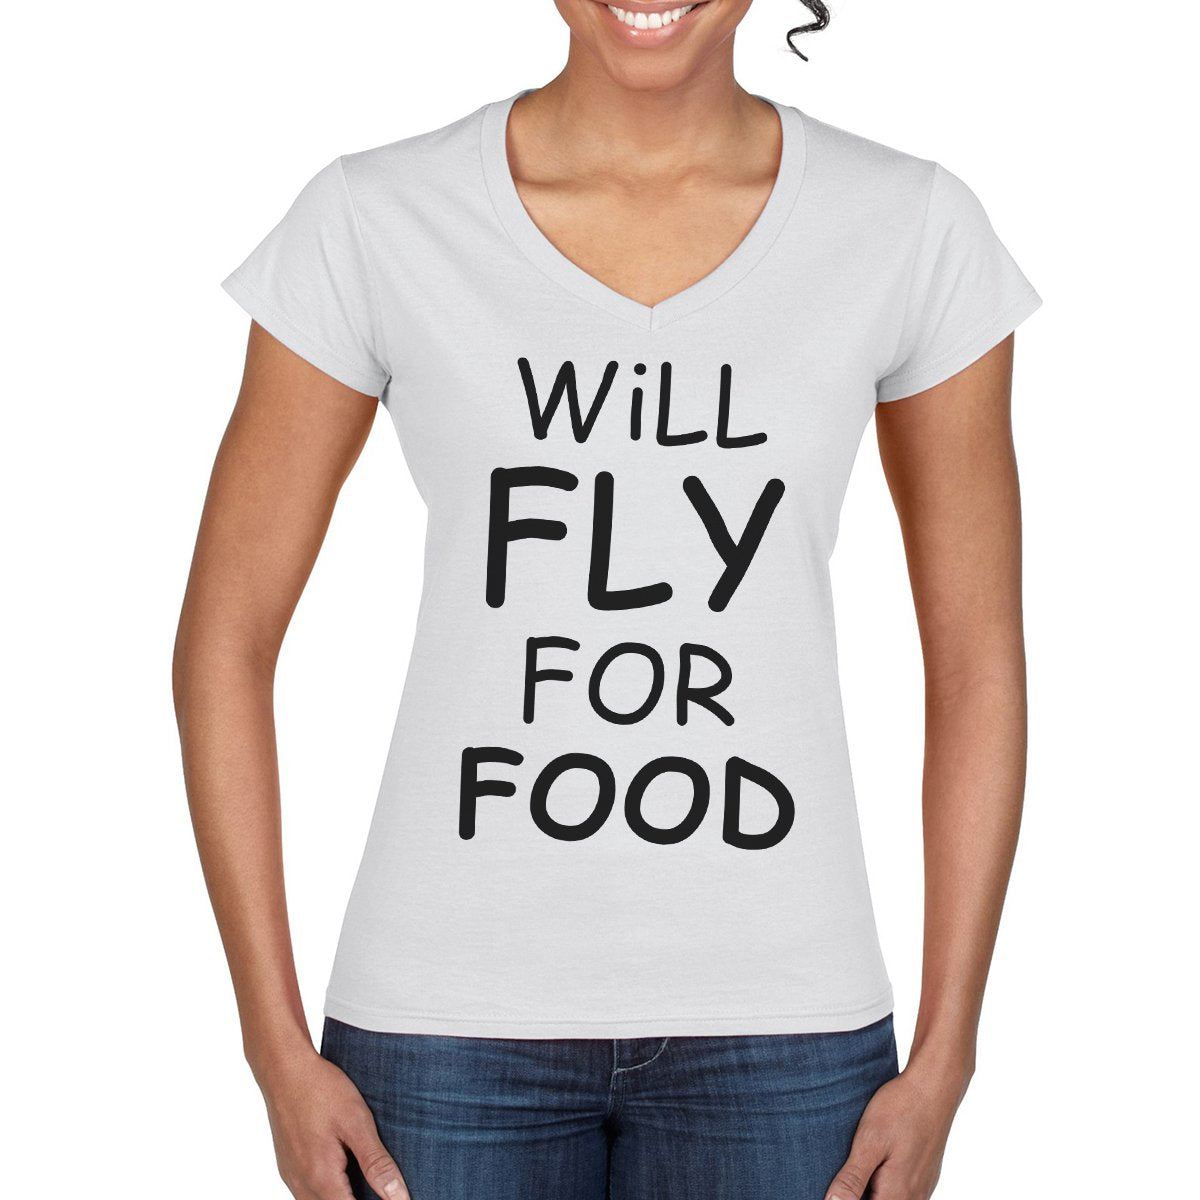 WILL FLY FOR FOOD Women's Semi-Fitted T-Shirt